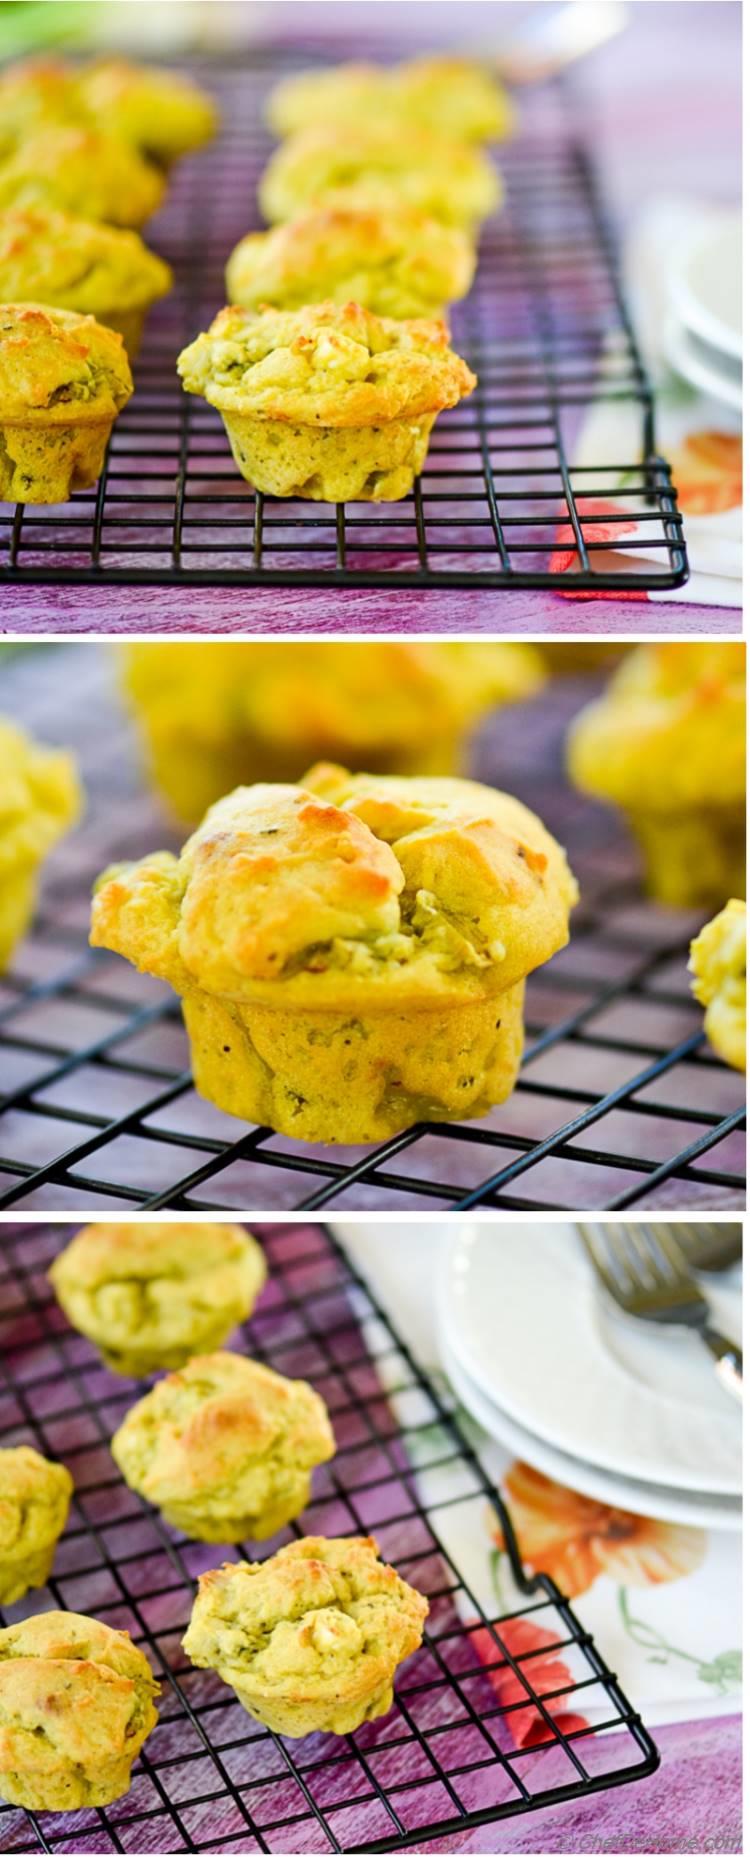 Vegan Avocado and Scallions Muffins. Easy to bake and ready in just 25 minutes!